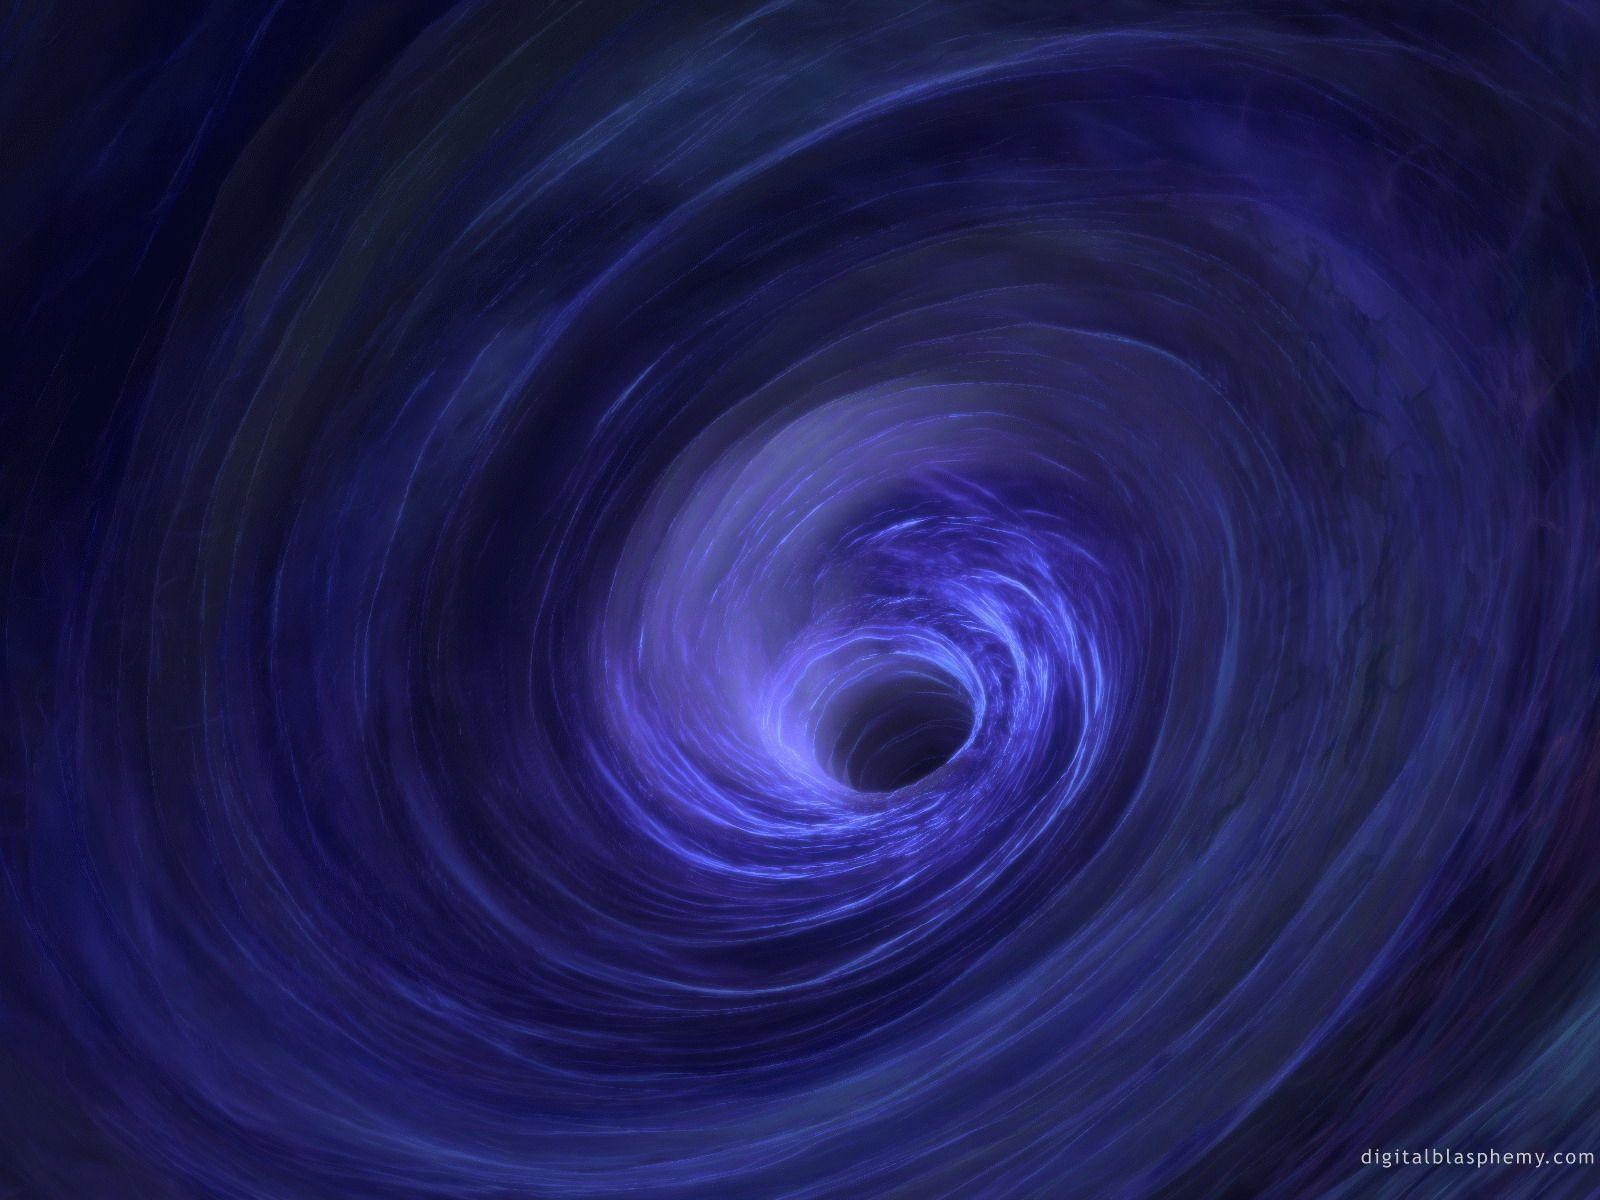 Black Hole Wallpapers 3085 HD Desktop Backgrounds and Widescreen